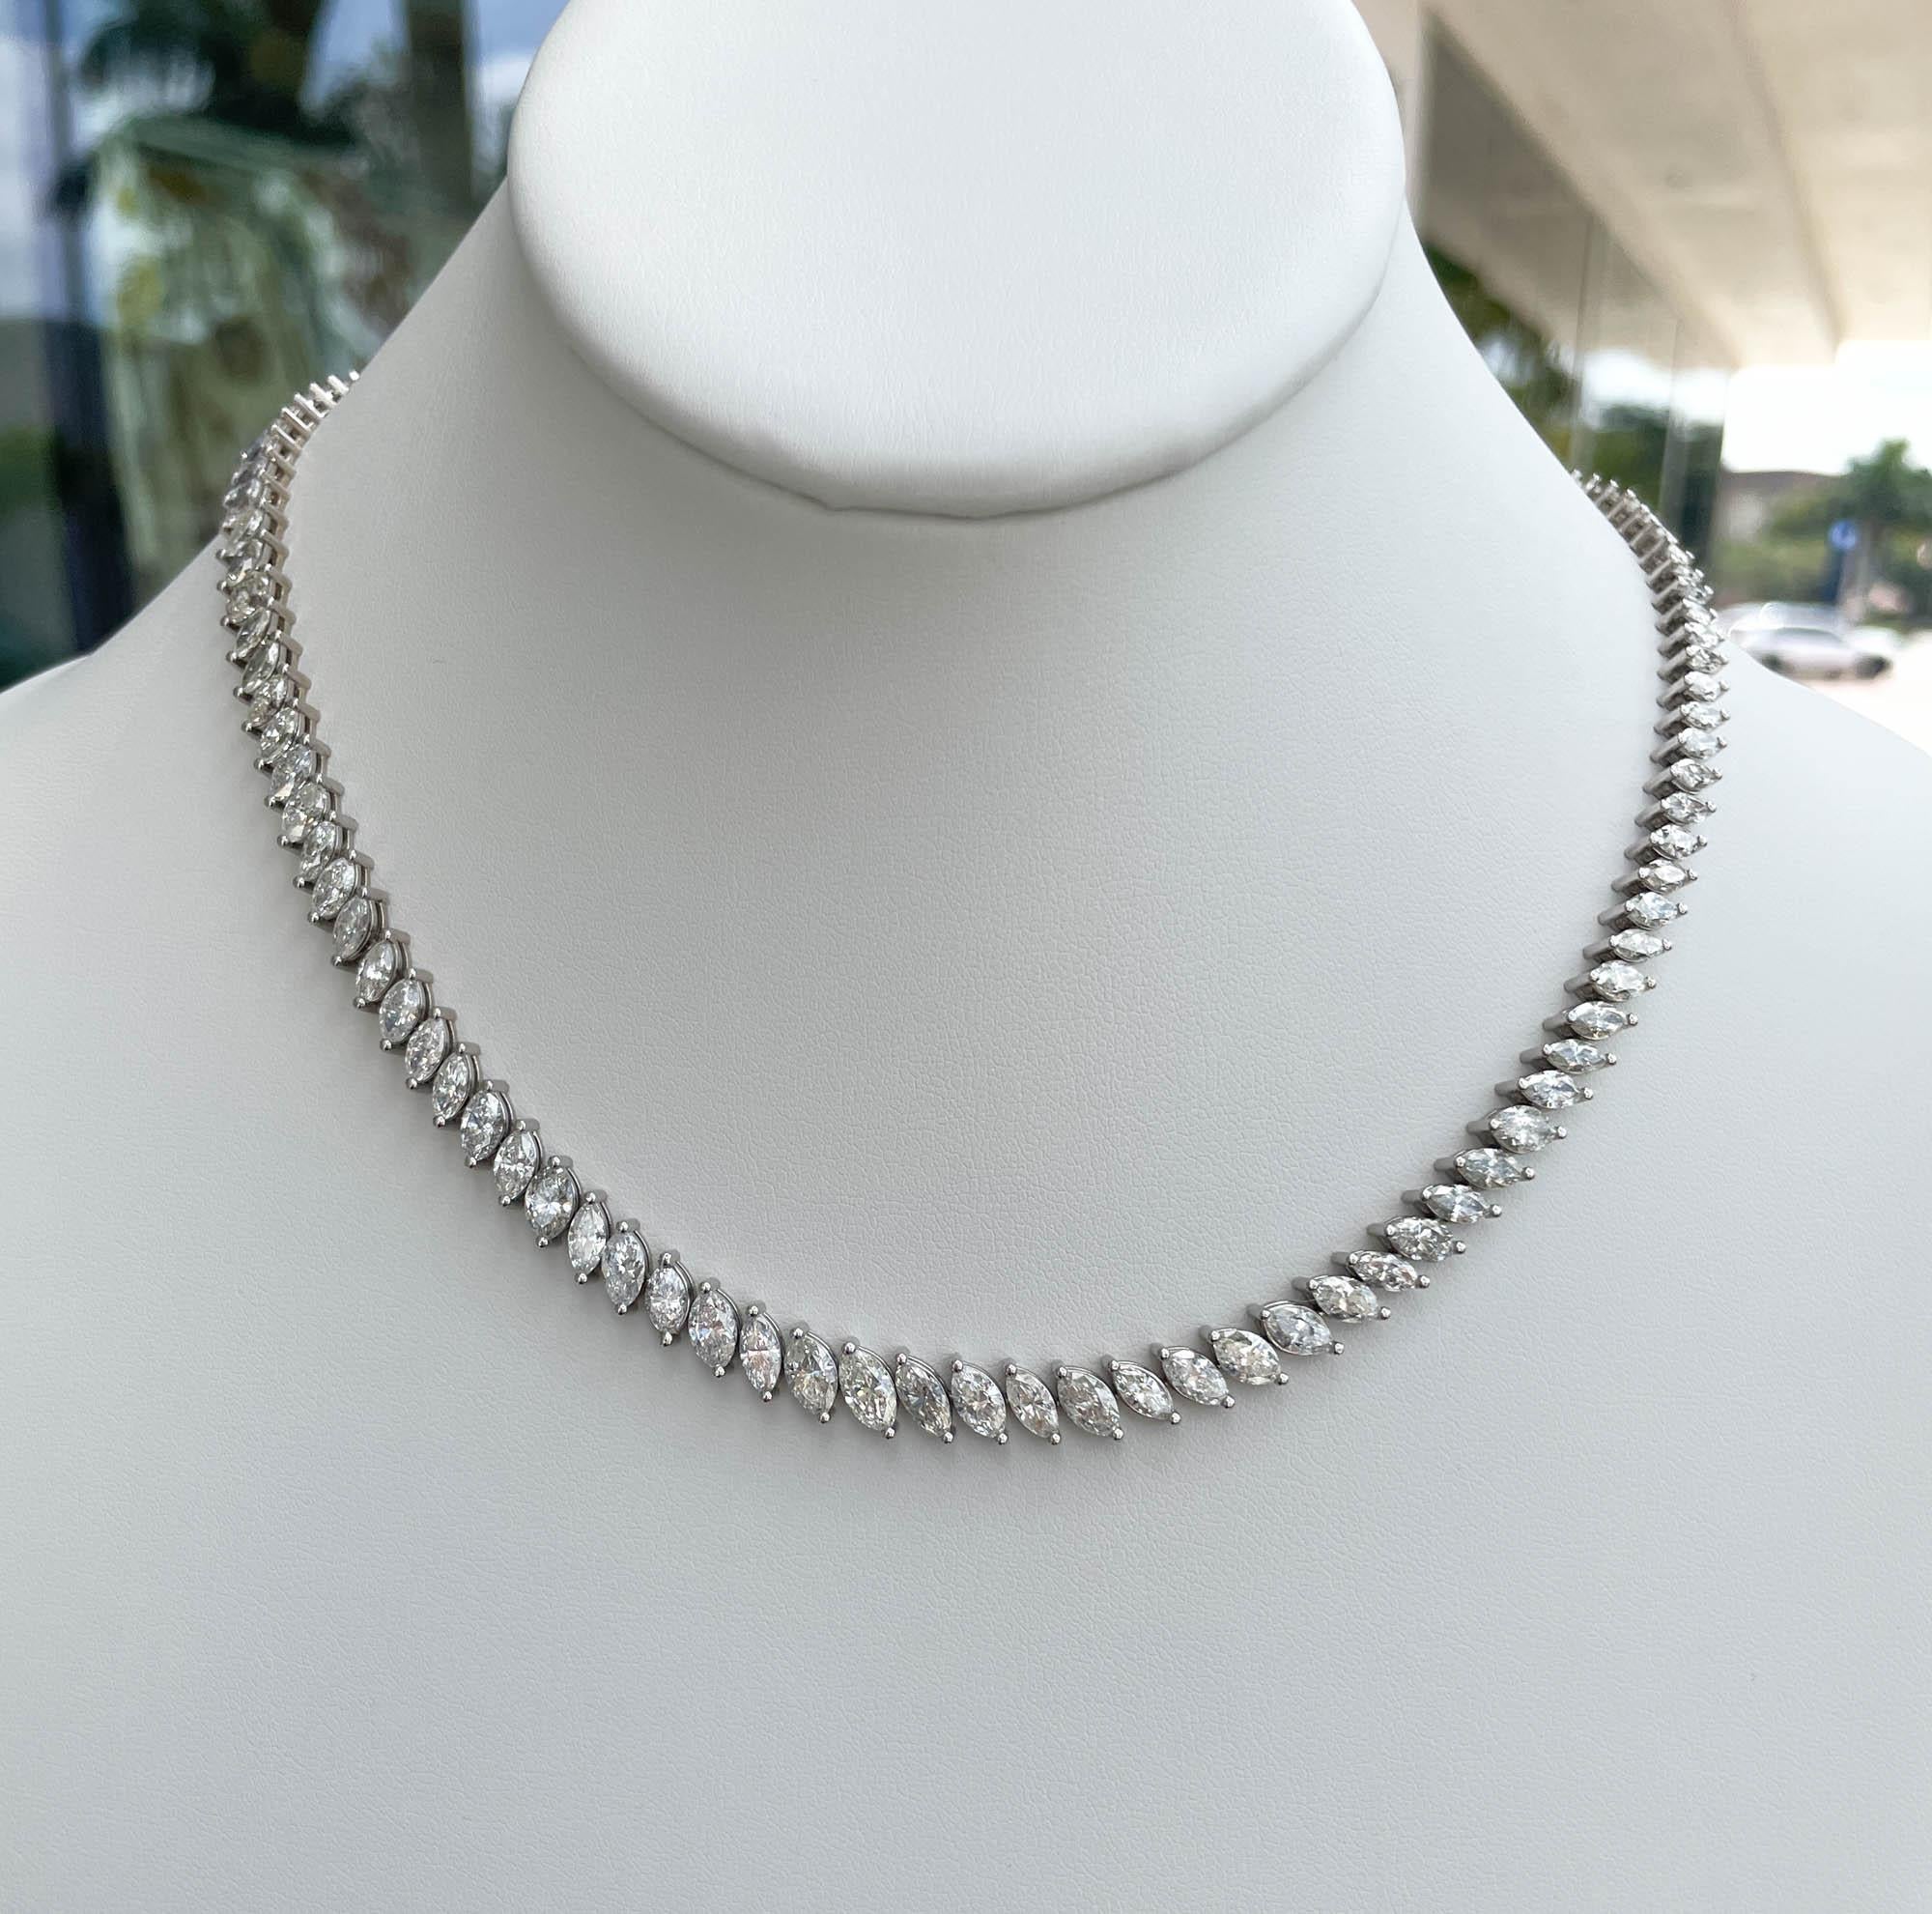 Jay Feder 18k White Gold Marquise Diamond Tennis Necklace

There are 117 marquise shaped diamonds; estimated total weight is 25.59 carats.

The necklace is 17.5 inches long and 7.38mm wide.

The total weight of the necklace is 38.2 grams.

Please